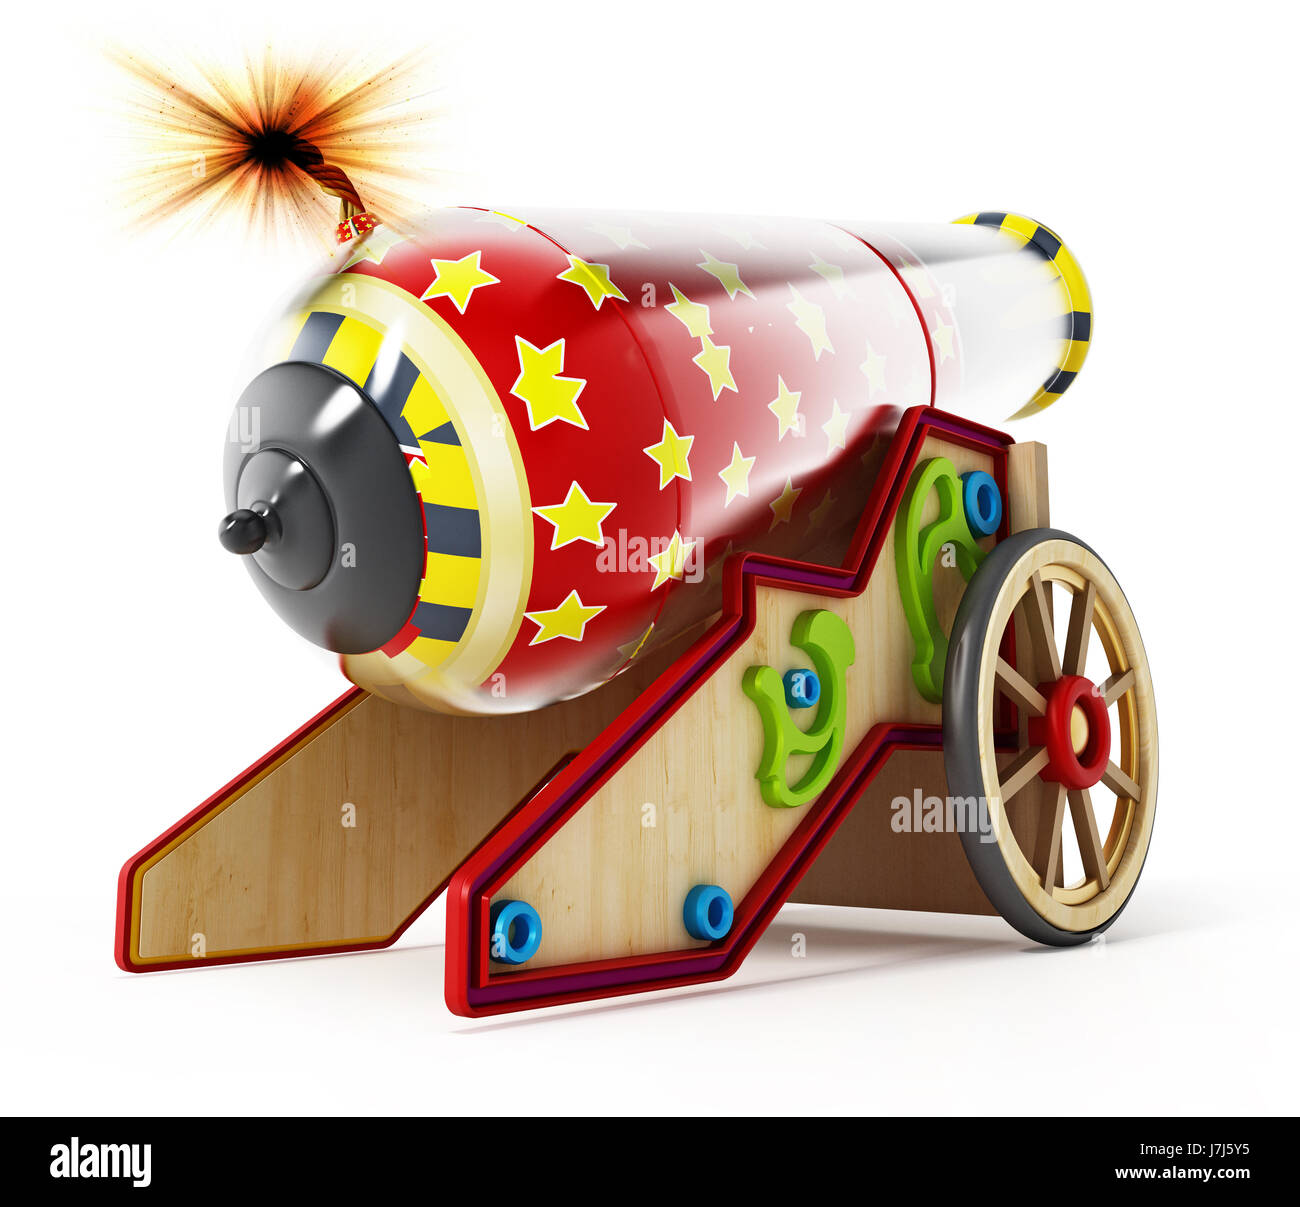 Circus cannon isolated on white background. 3D illustration. Stock Photo